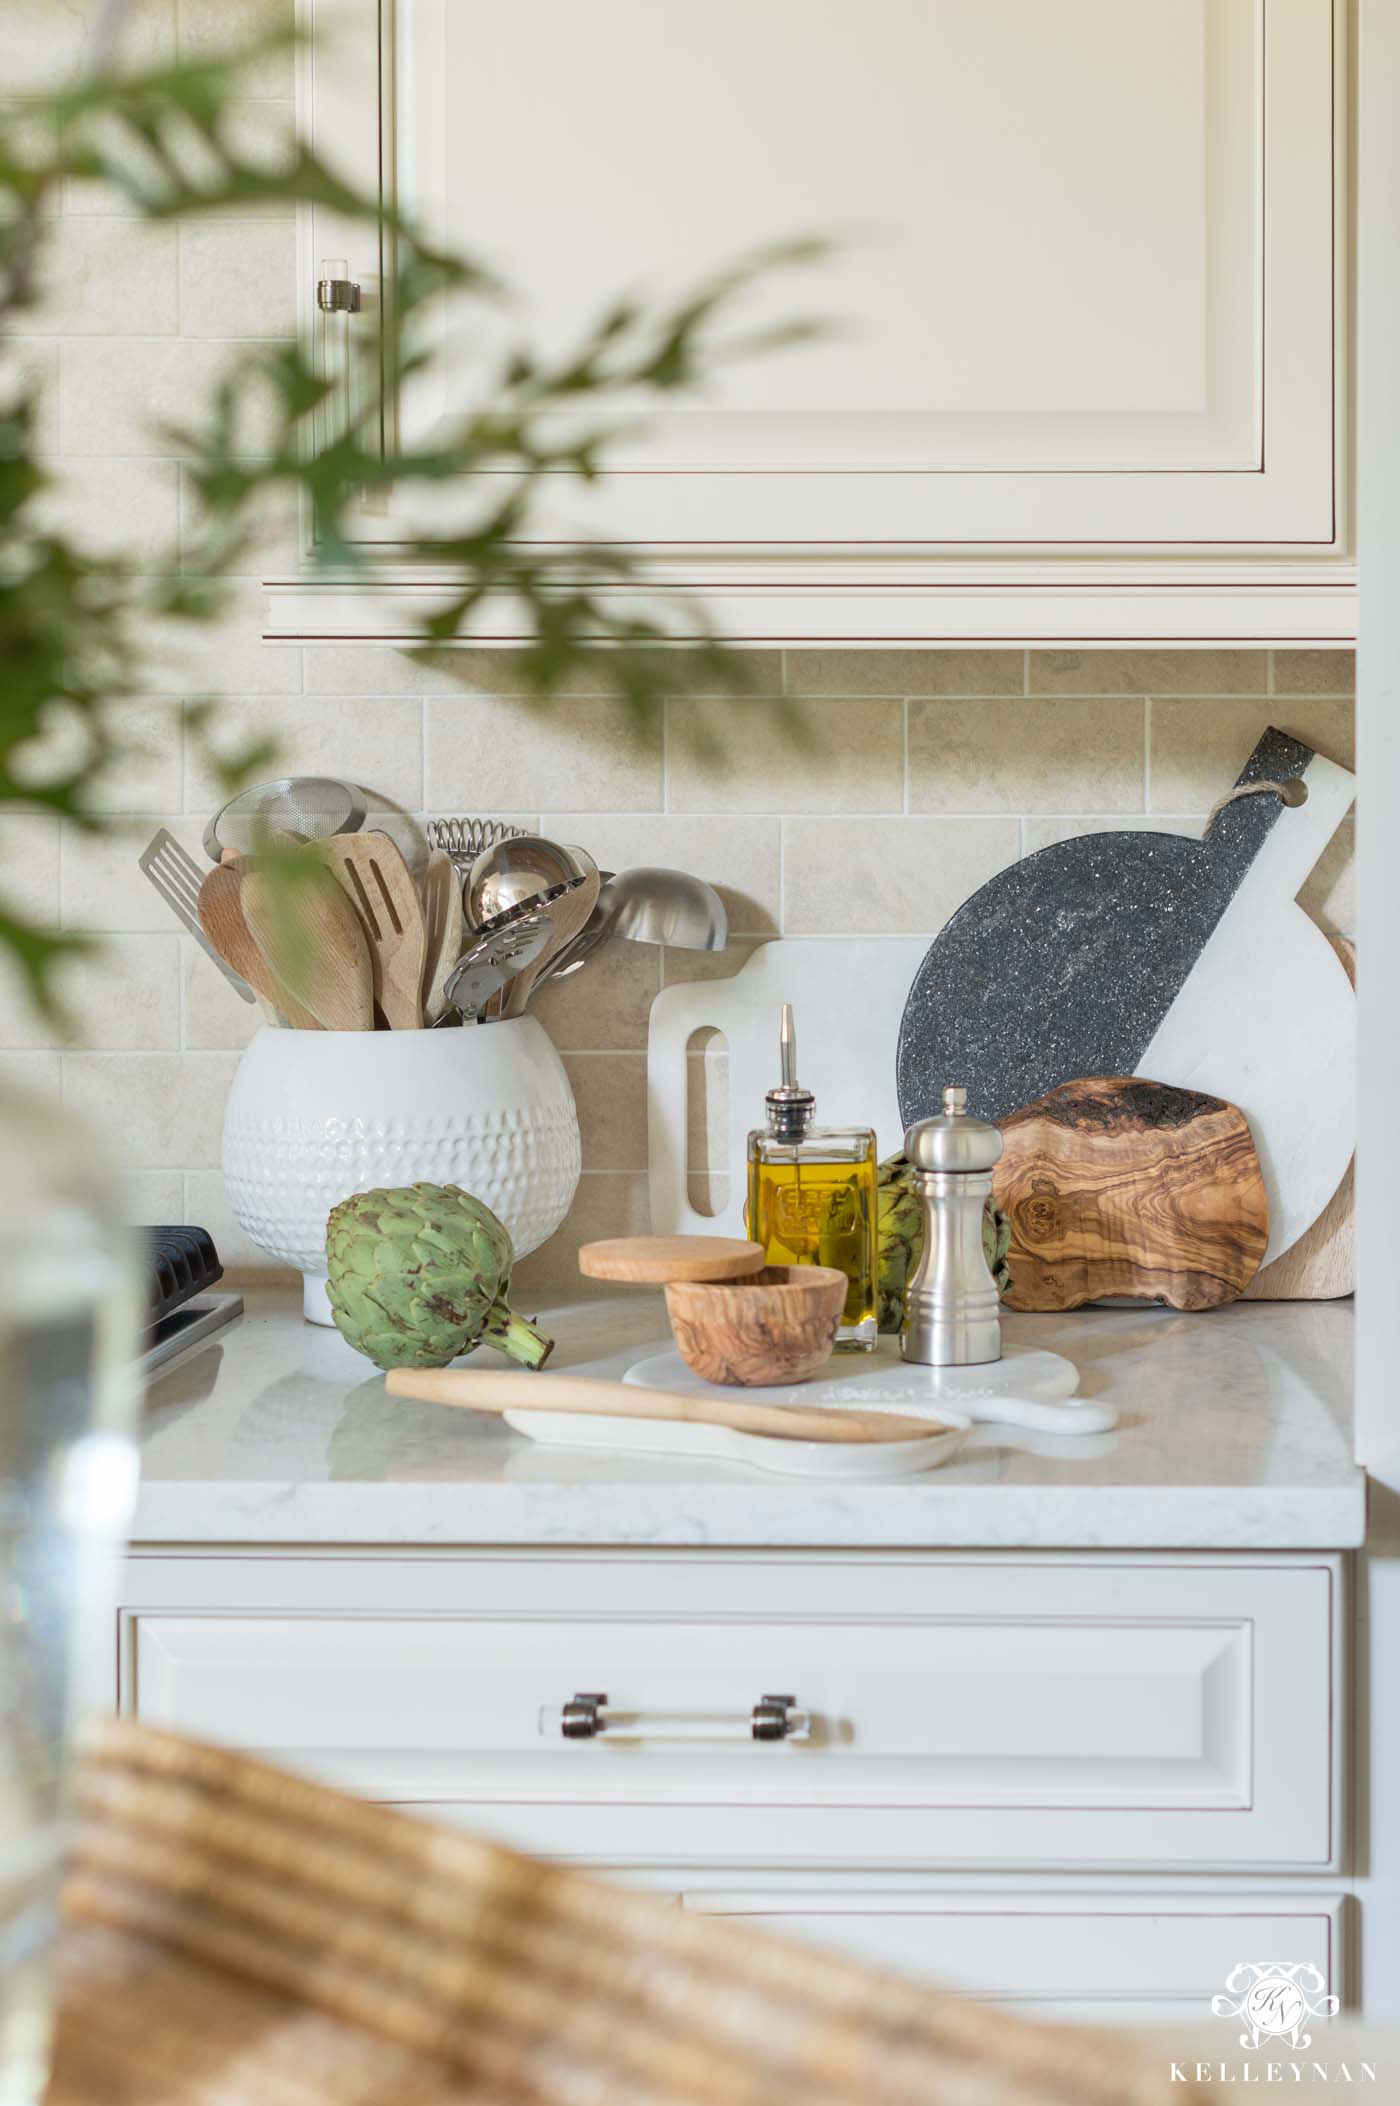 How to style kitchen counters